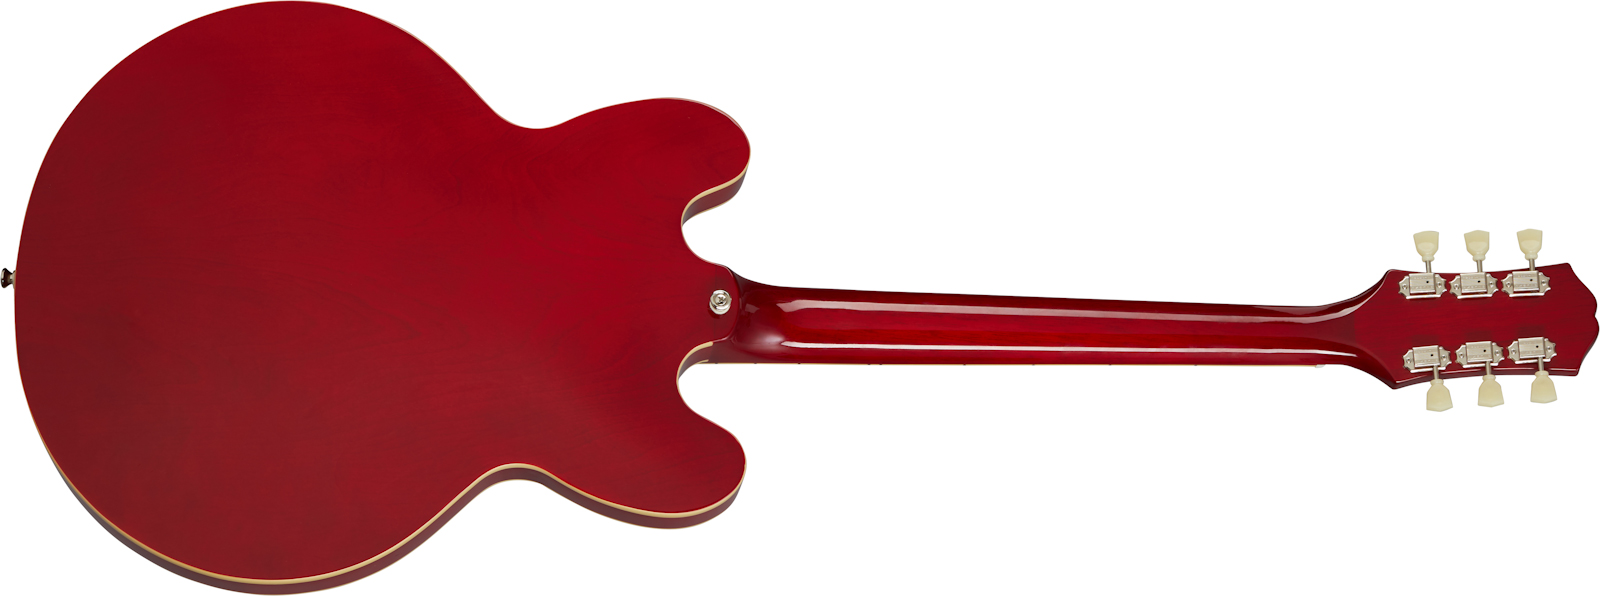 Epiphone Es-335 Inspired By Gibson Original 2h Ht Rw - Cherry - Semi-hollow electric guitar - Variation 1